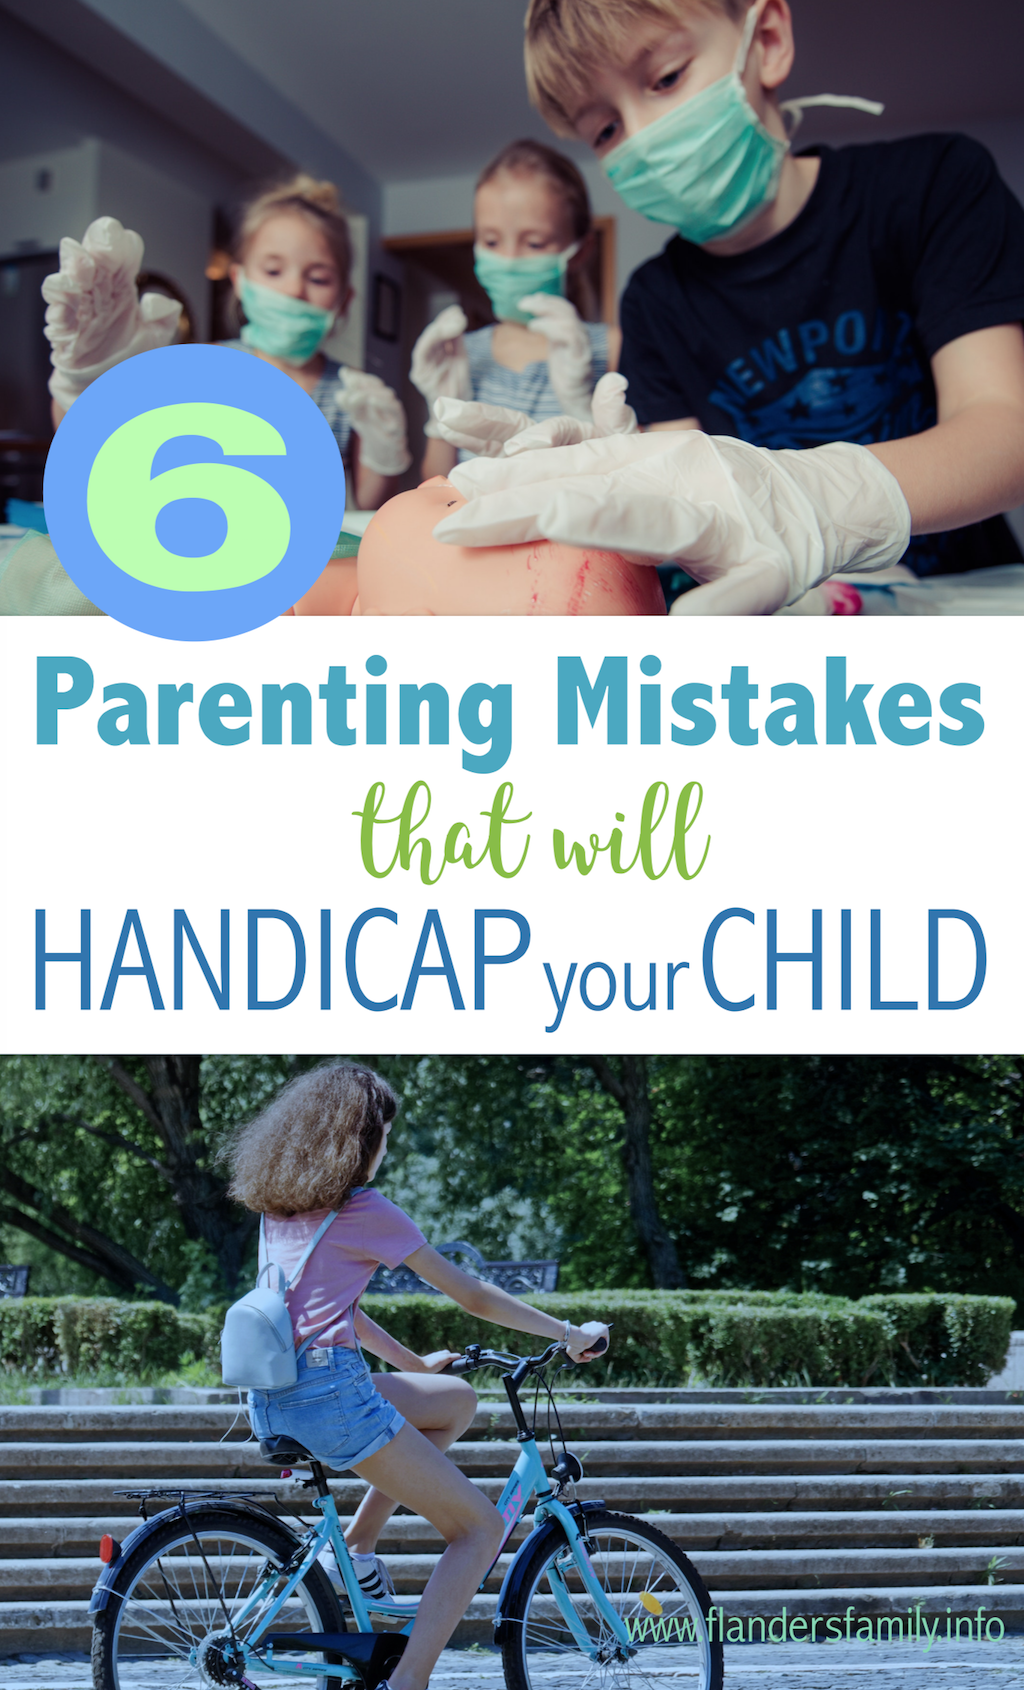 Have You Unintentionally Handicapped your Child?